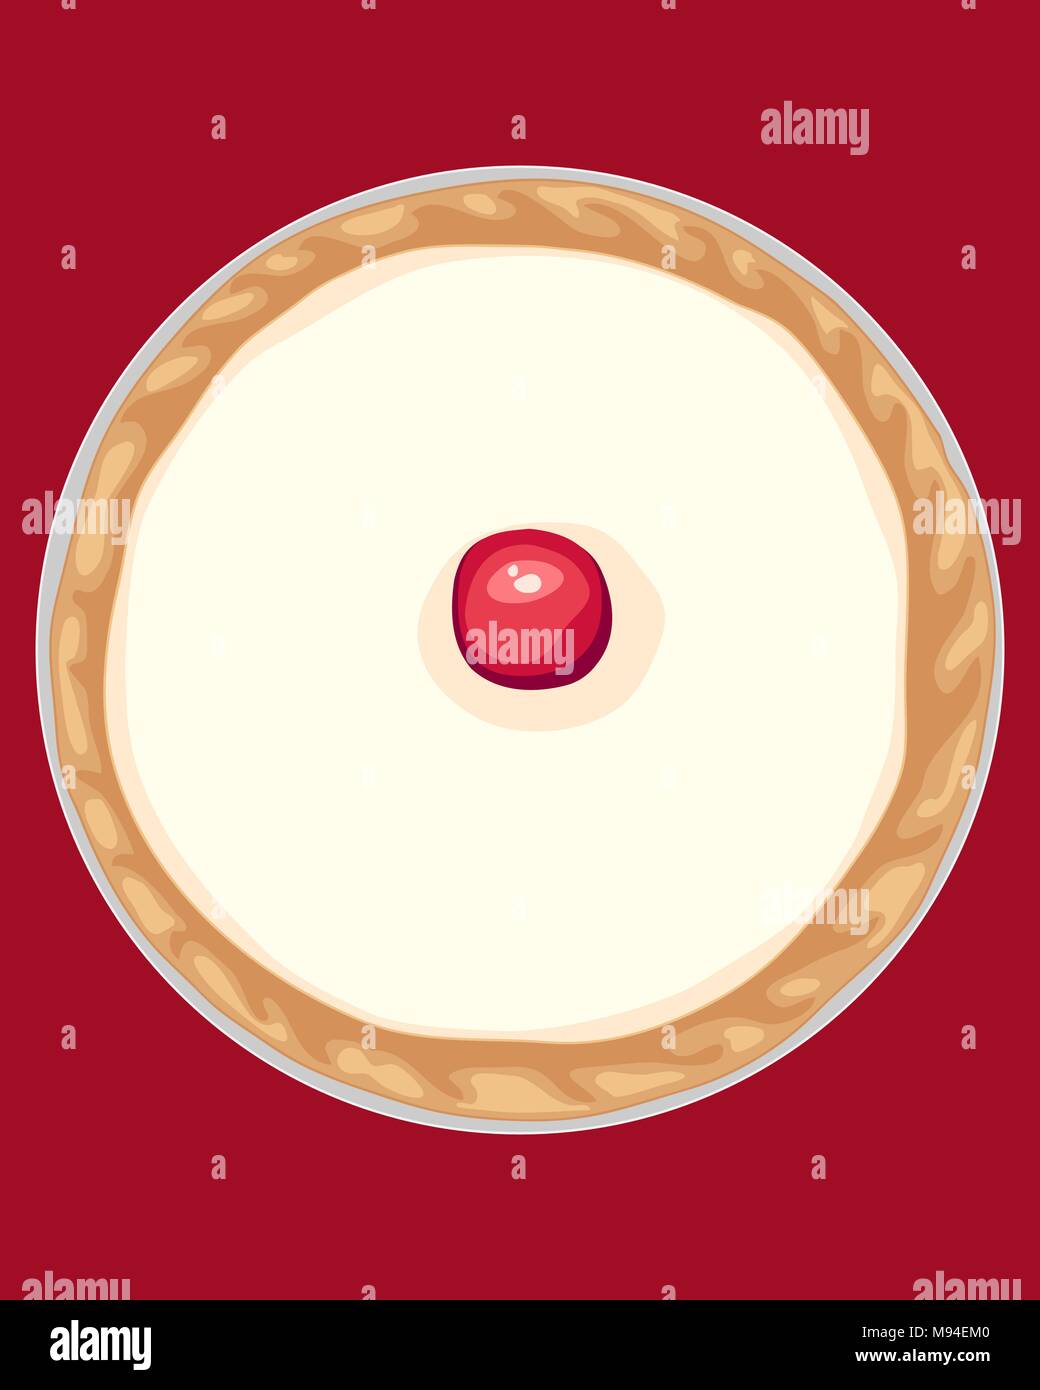 a vector illustration in eps format of an individual Bakewell tart with red cherry fondant white icing and golden pastry in a foil wrapping Stock Vector